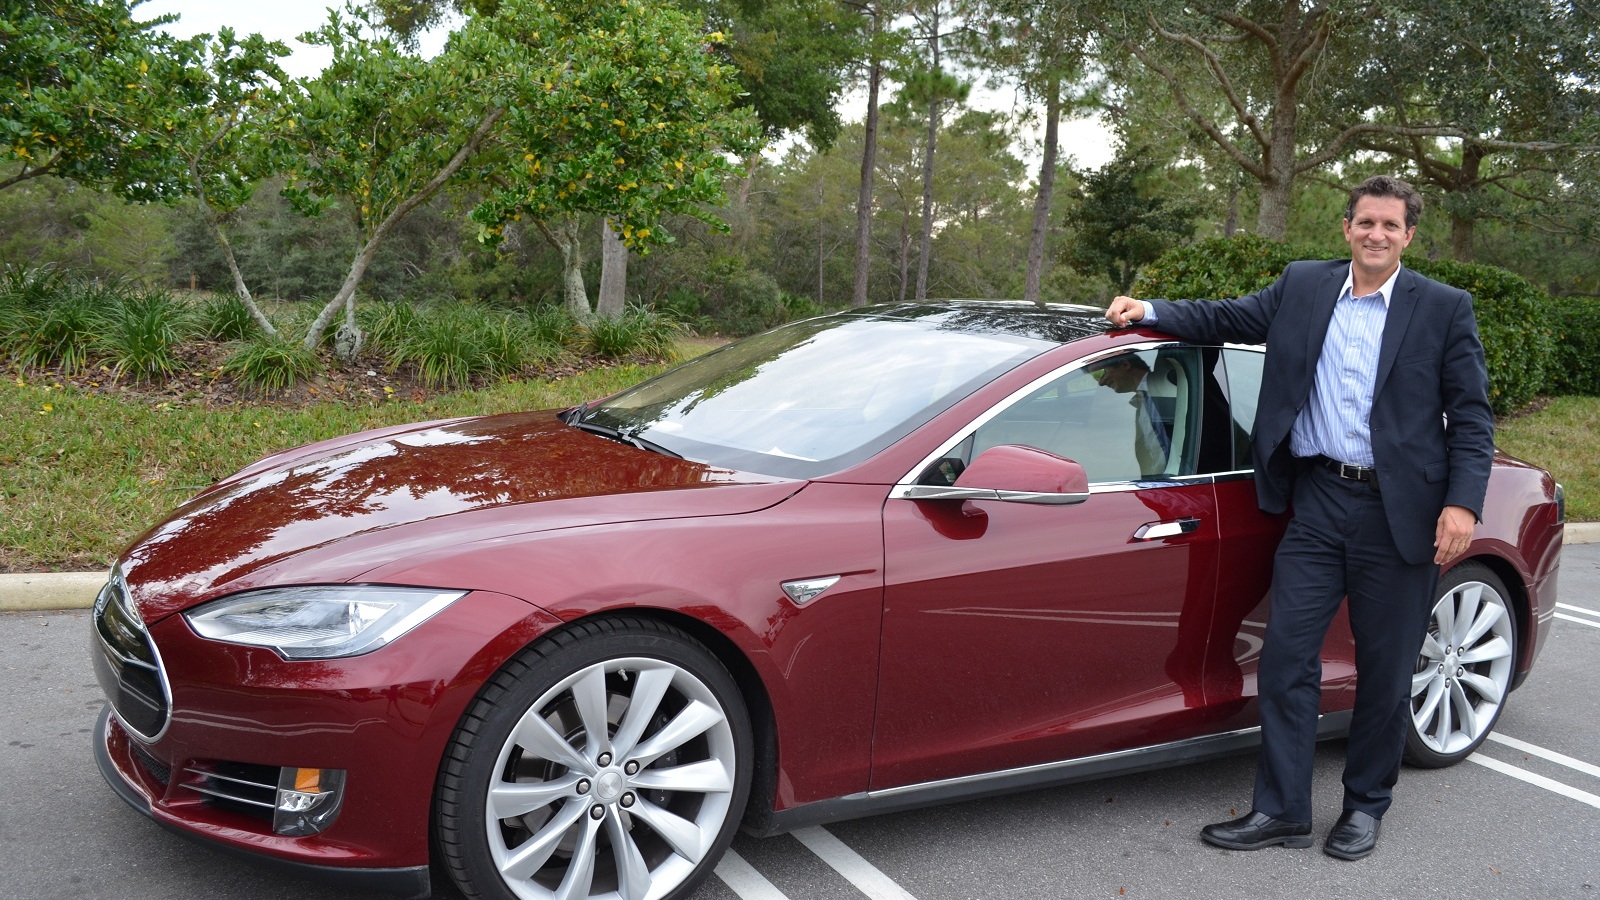 Tesla Model S owner David Metcalf after covering more than 400 miles [photo: Gene Kruckemyer]